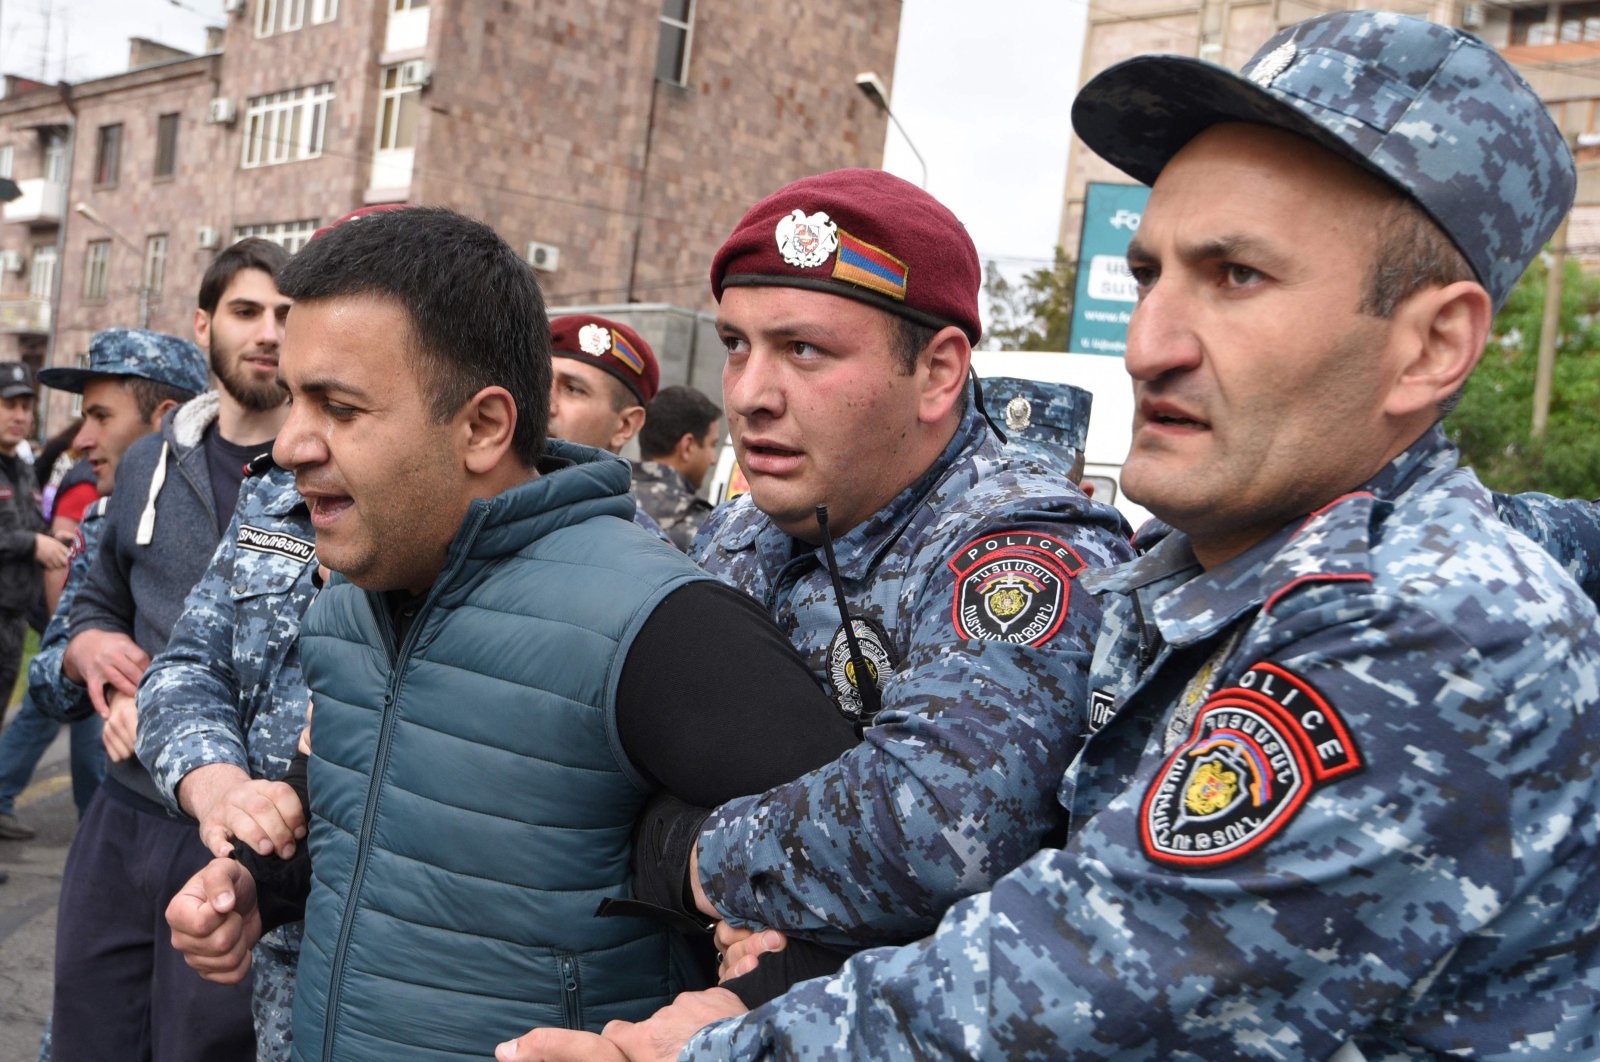 Armenian police officers detain a demonstrator during an opposition rally held to protest against Karabakh concession in Yerevan on May 3, 2022. (AFP Photo)